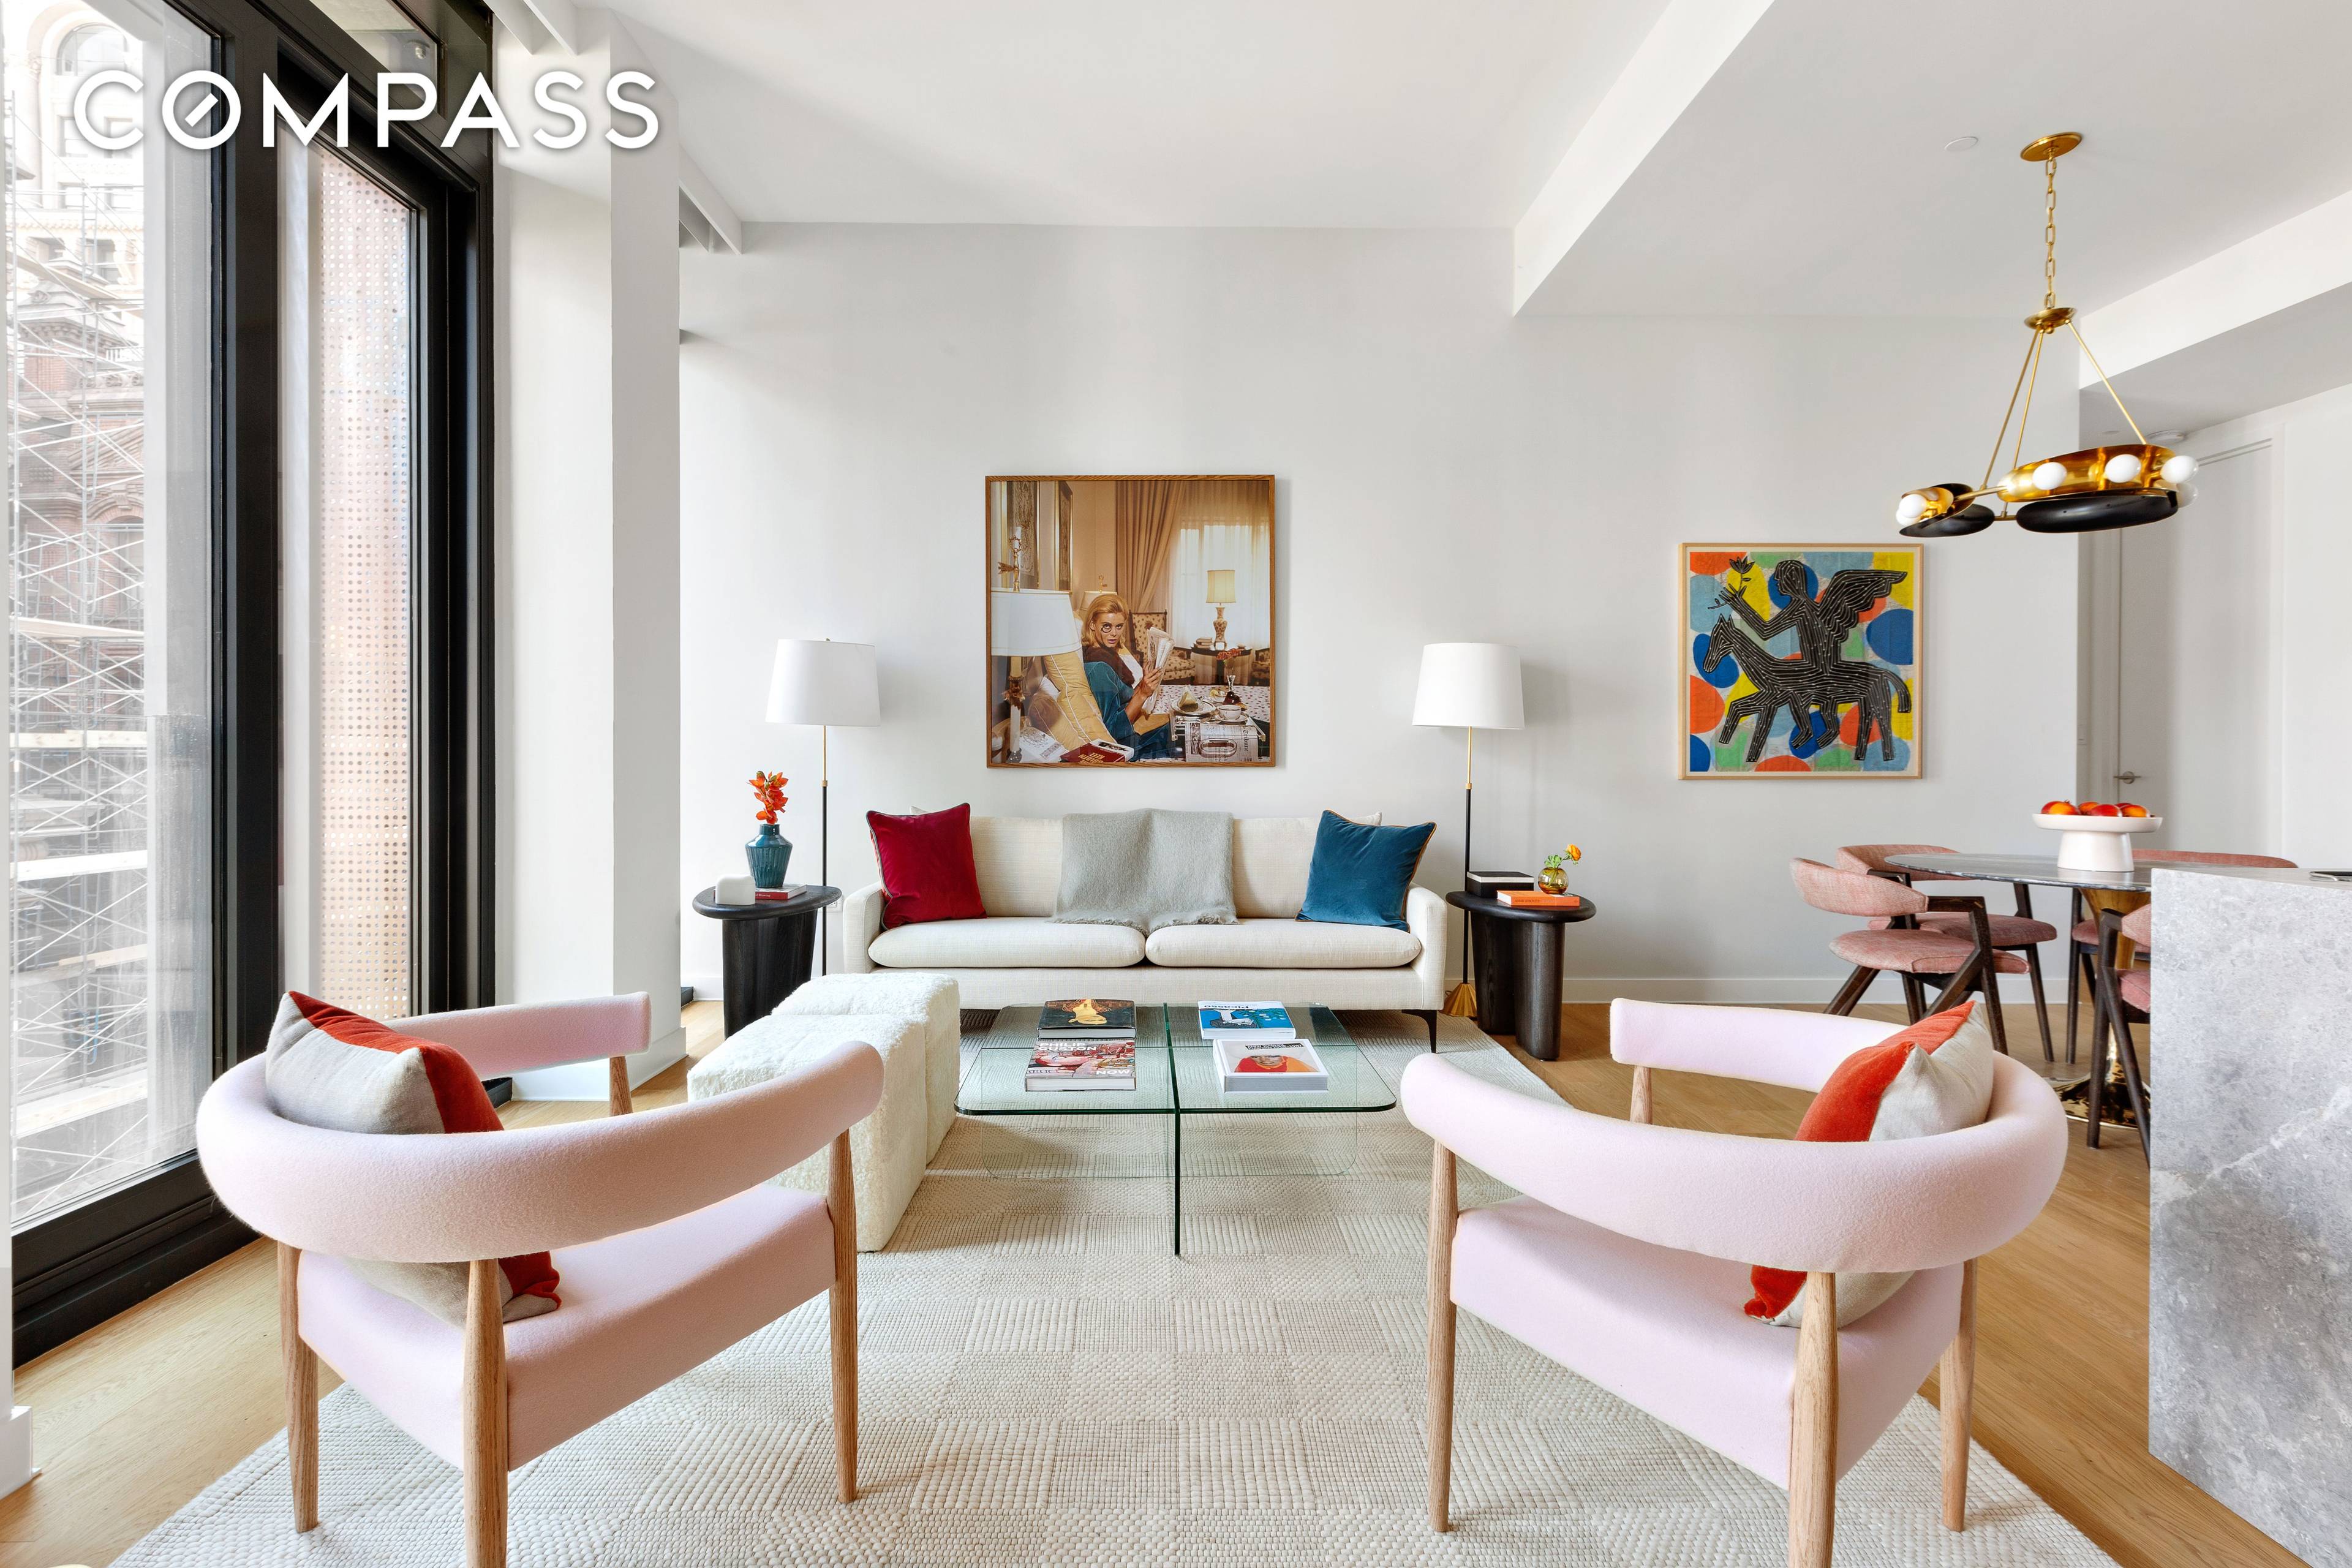 Closings Have Begun ! The first residential property in New York City by Pritzker Prize winning architect Richard Rogers, Rogers Stirk Harbour Partners.